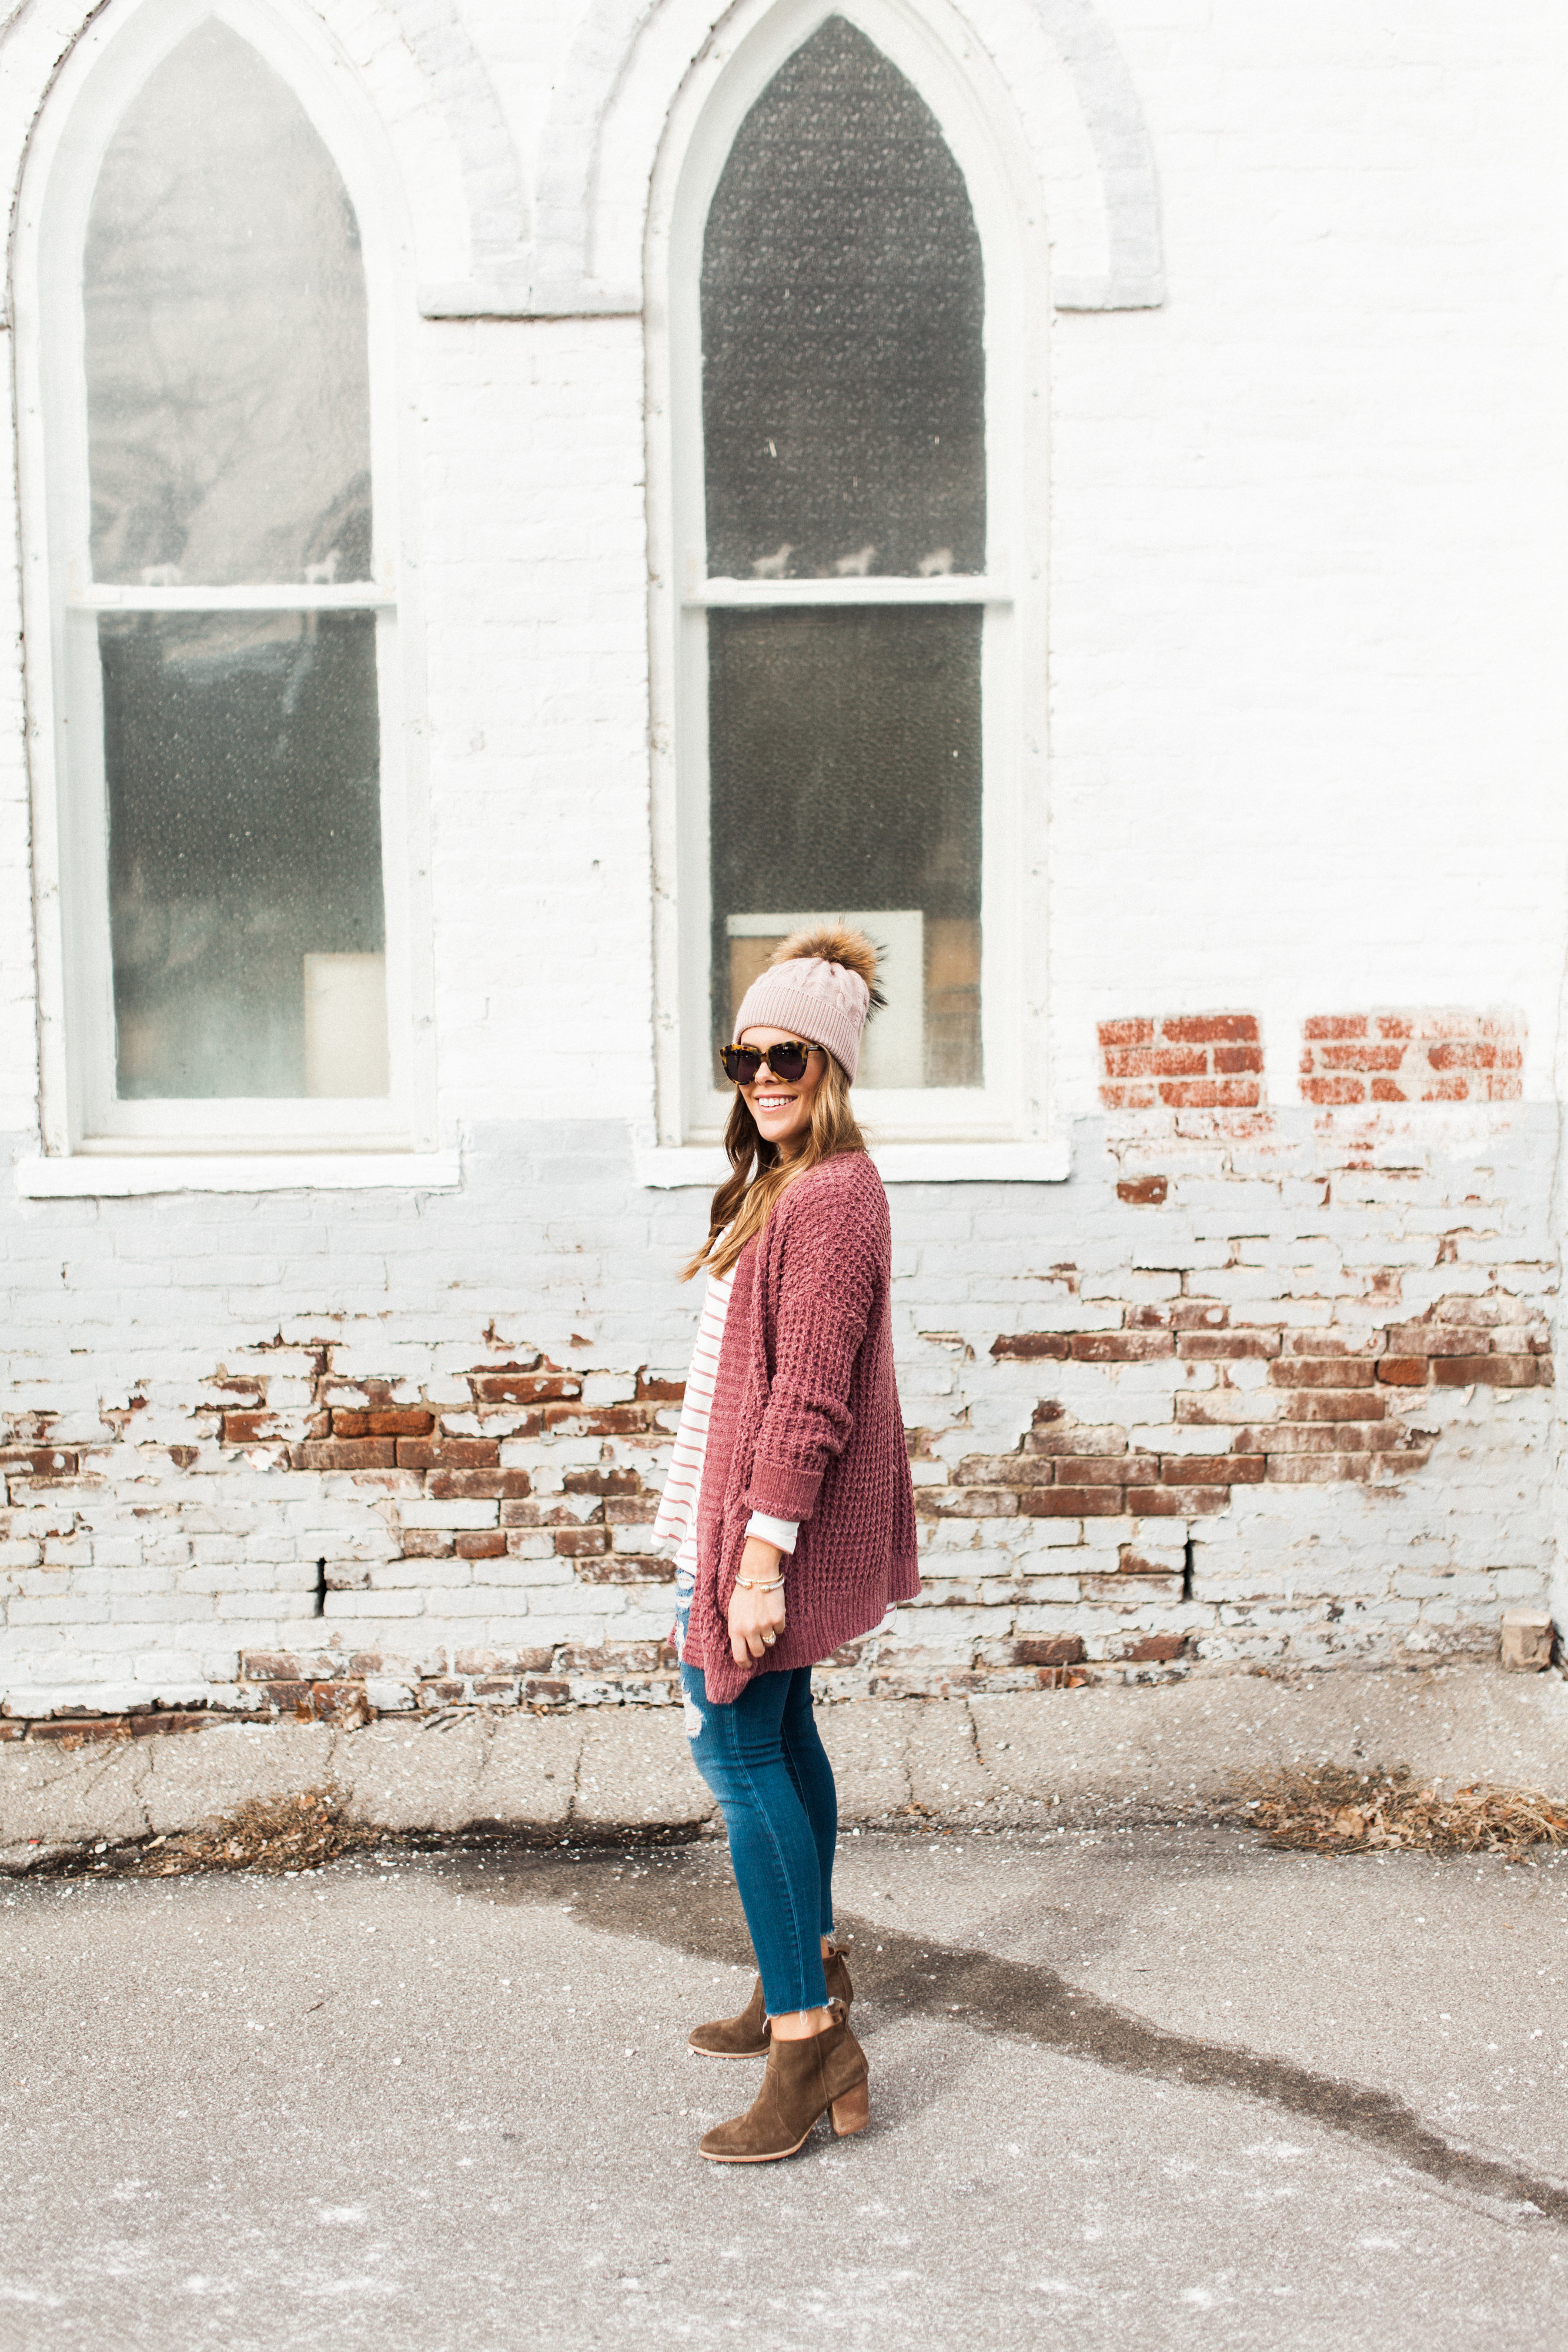 Winter Outfit Idea via Glitter & Gingham / ft. Pink Cardigan, the BEST Stripe Tee